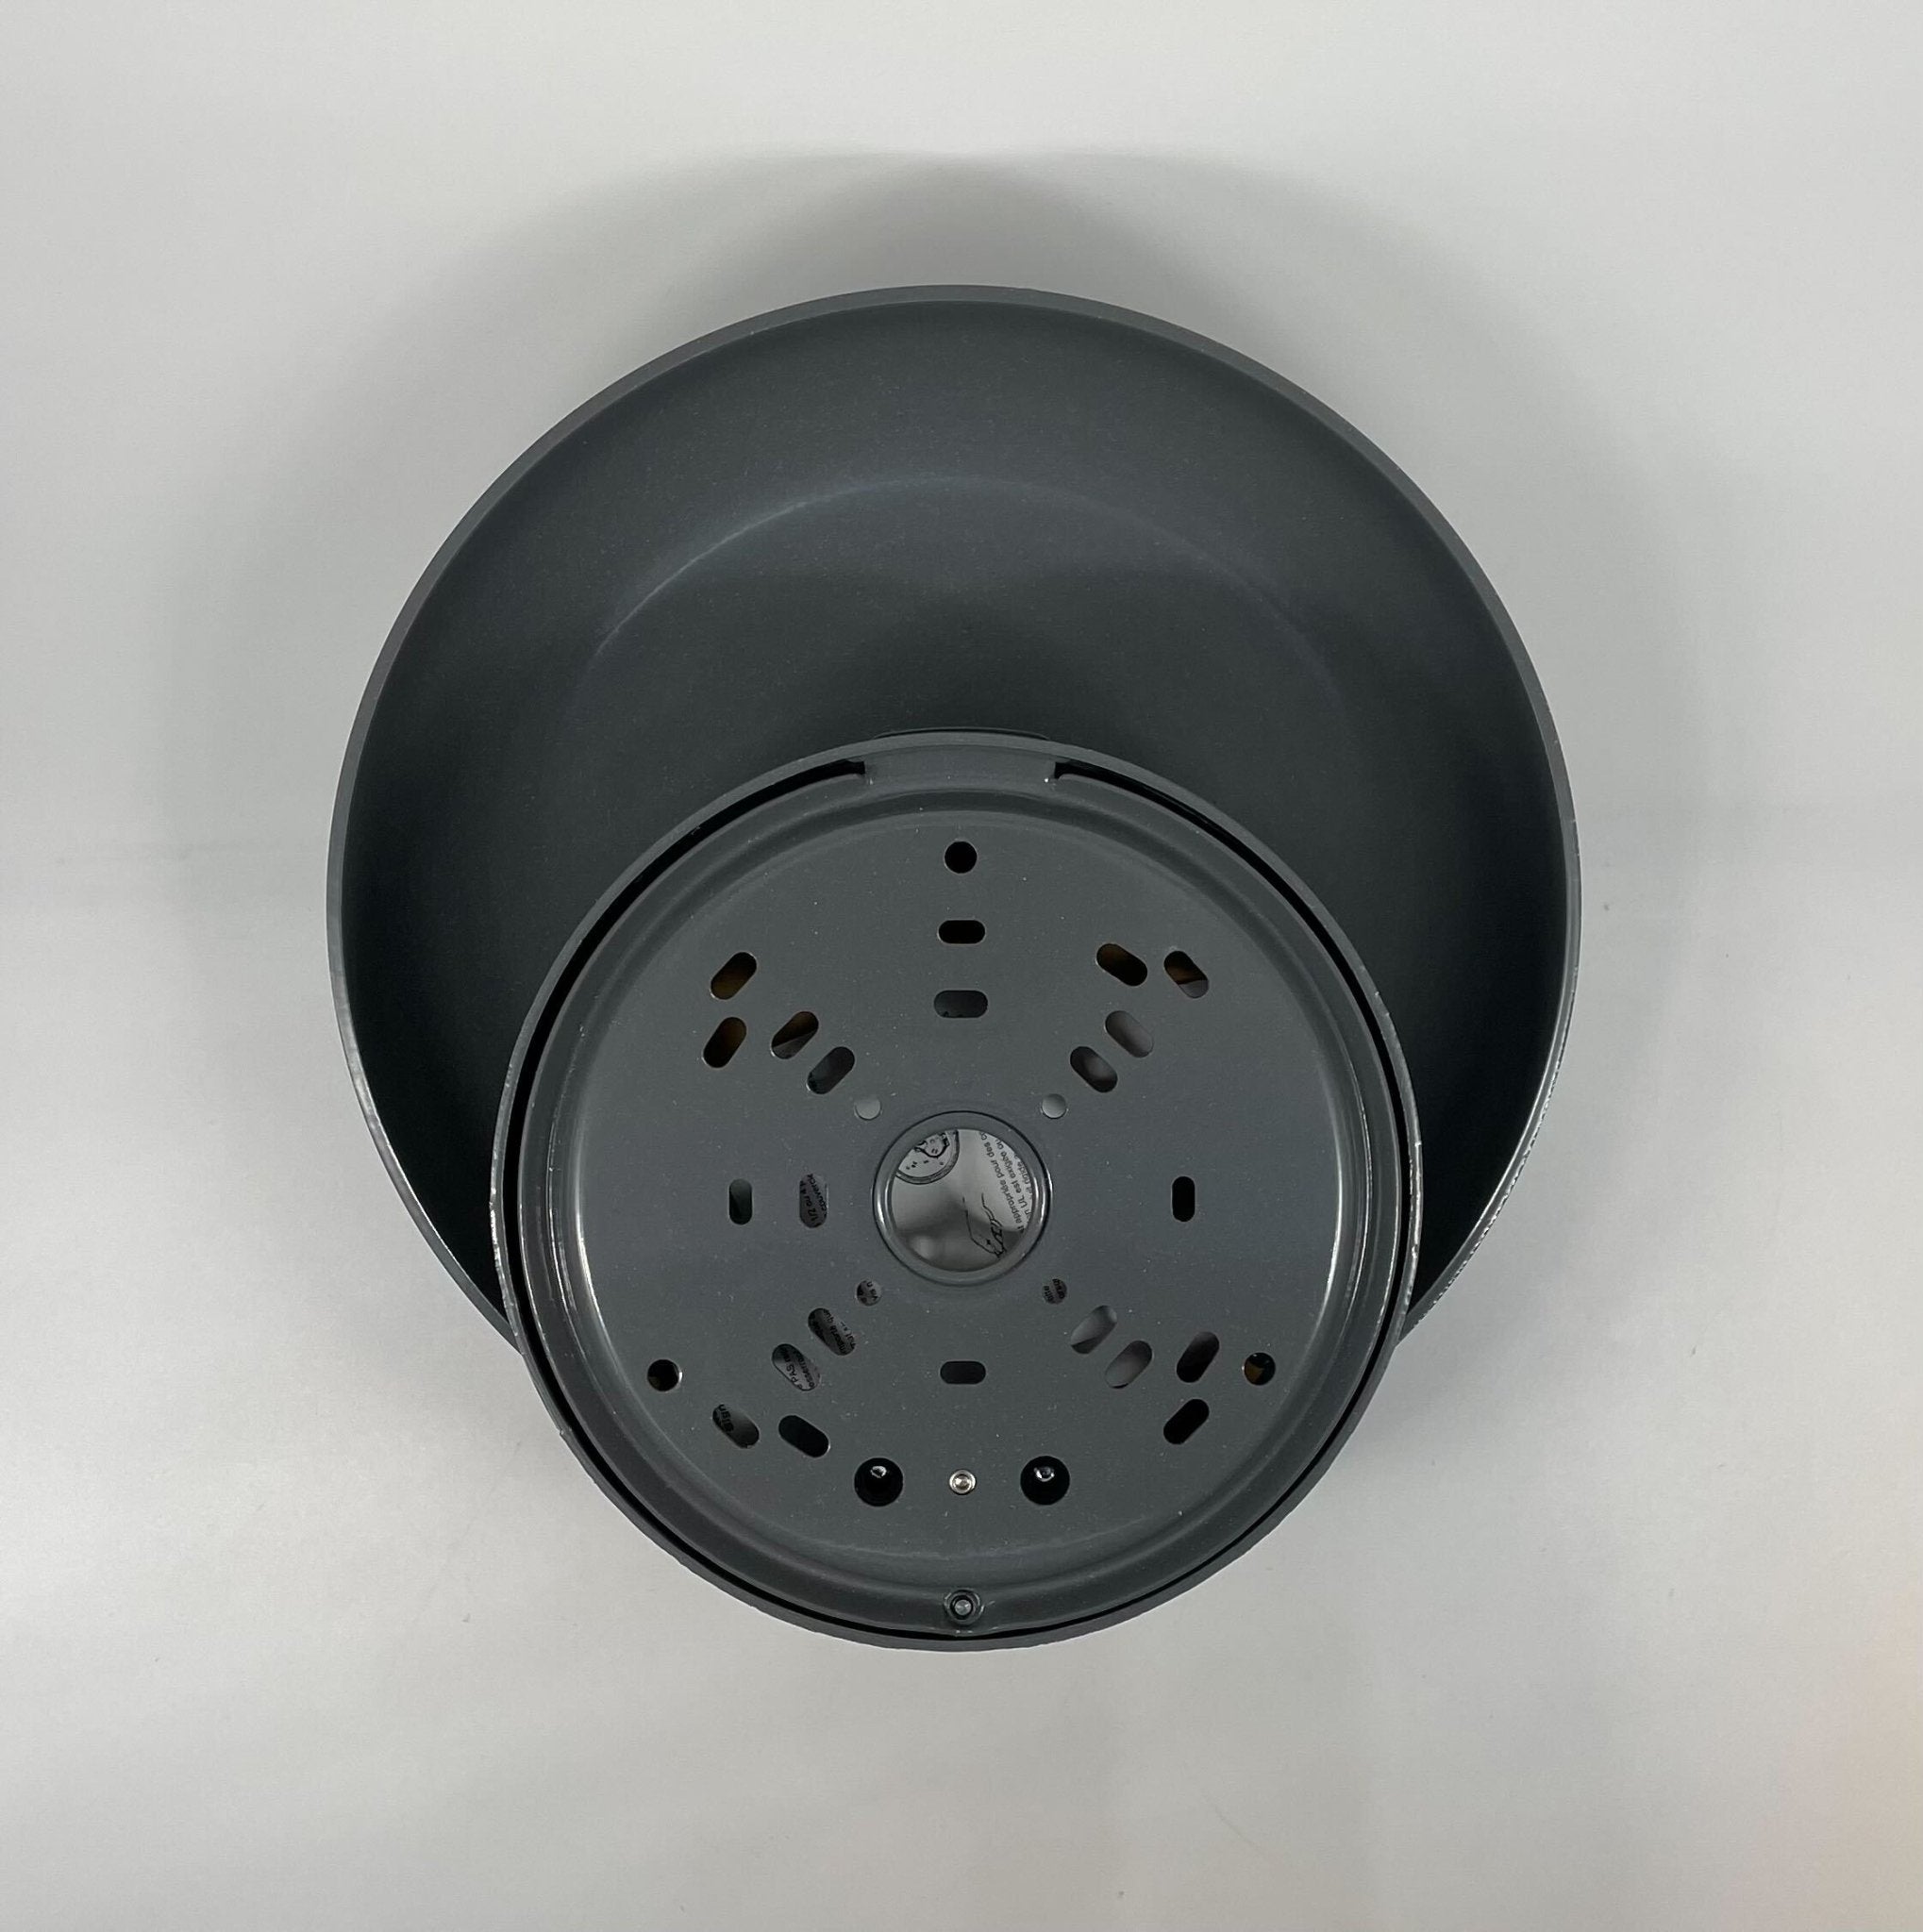 Edwards 340-10N5 Bell - The Fire Alarm Supplier